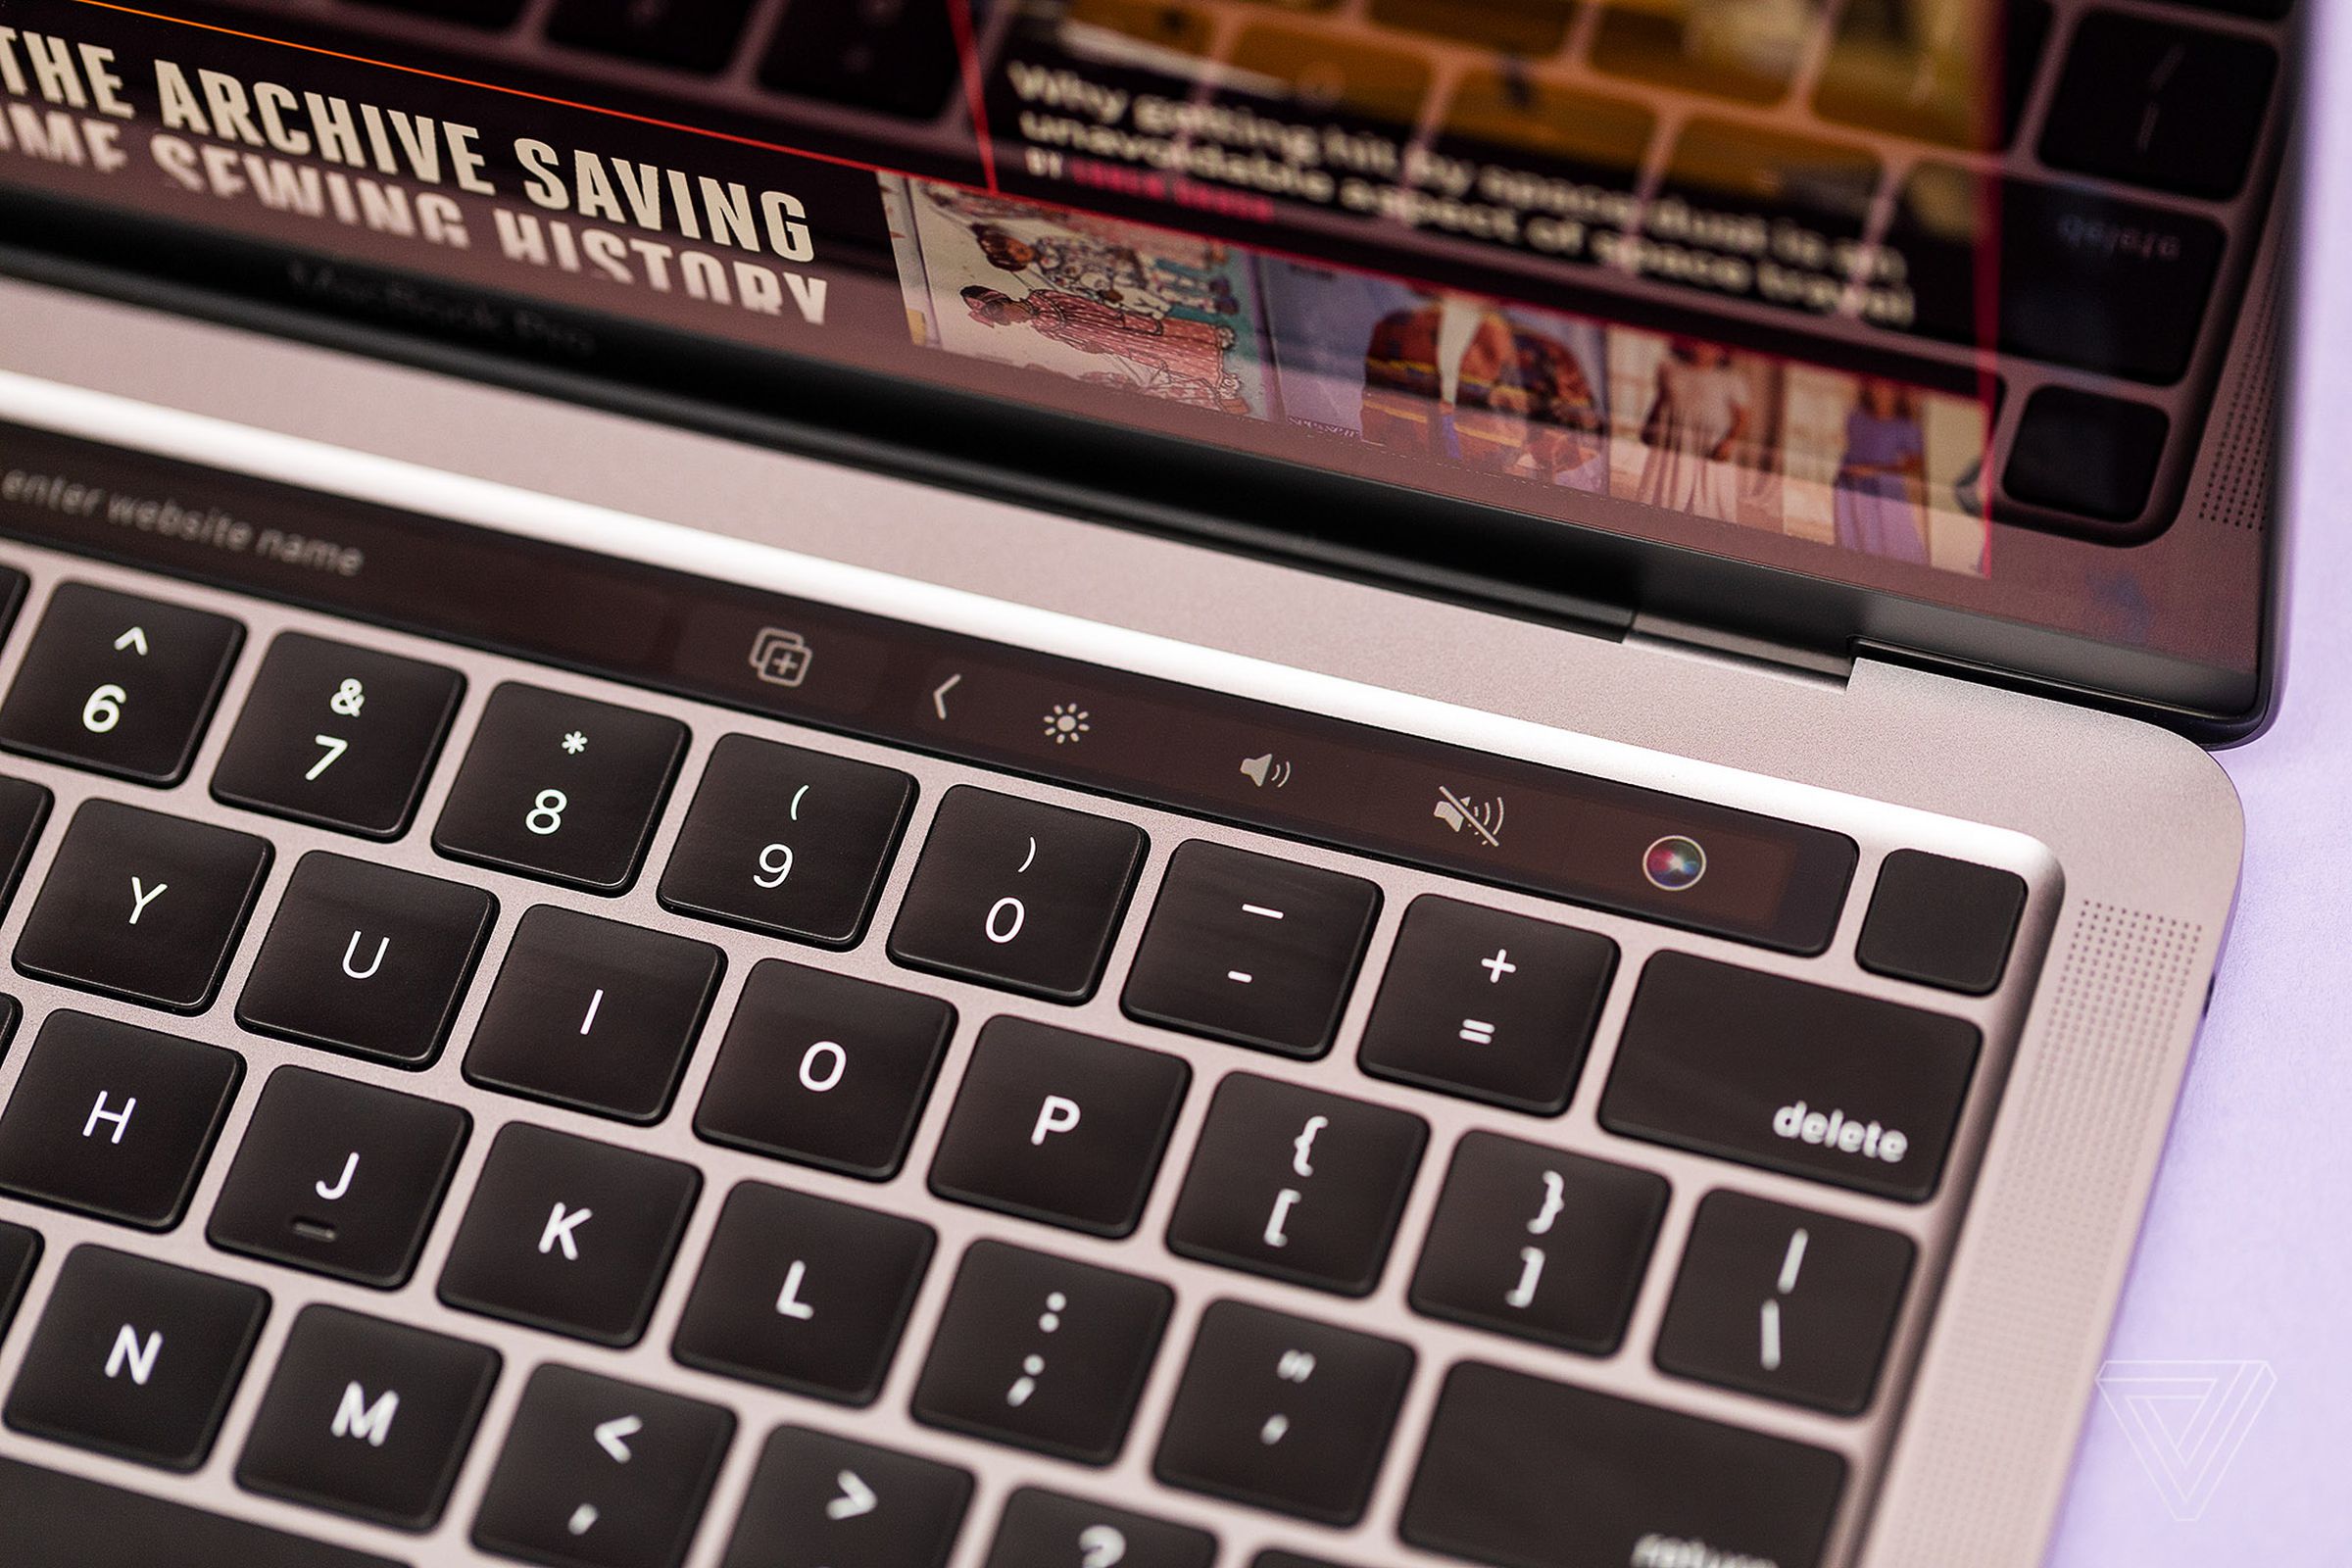 The top-right corner of the MacBook Pro keyboard